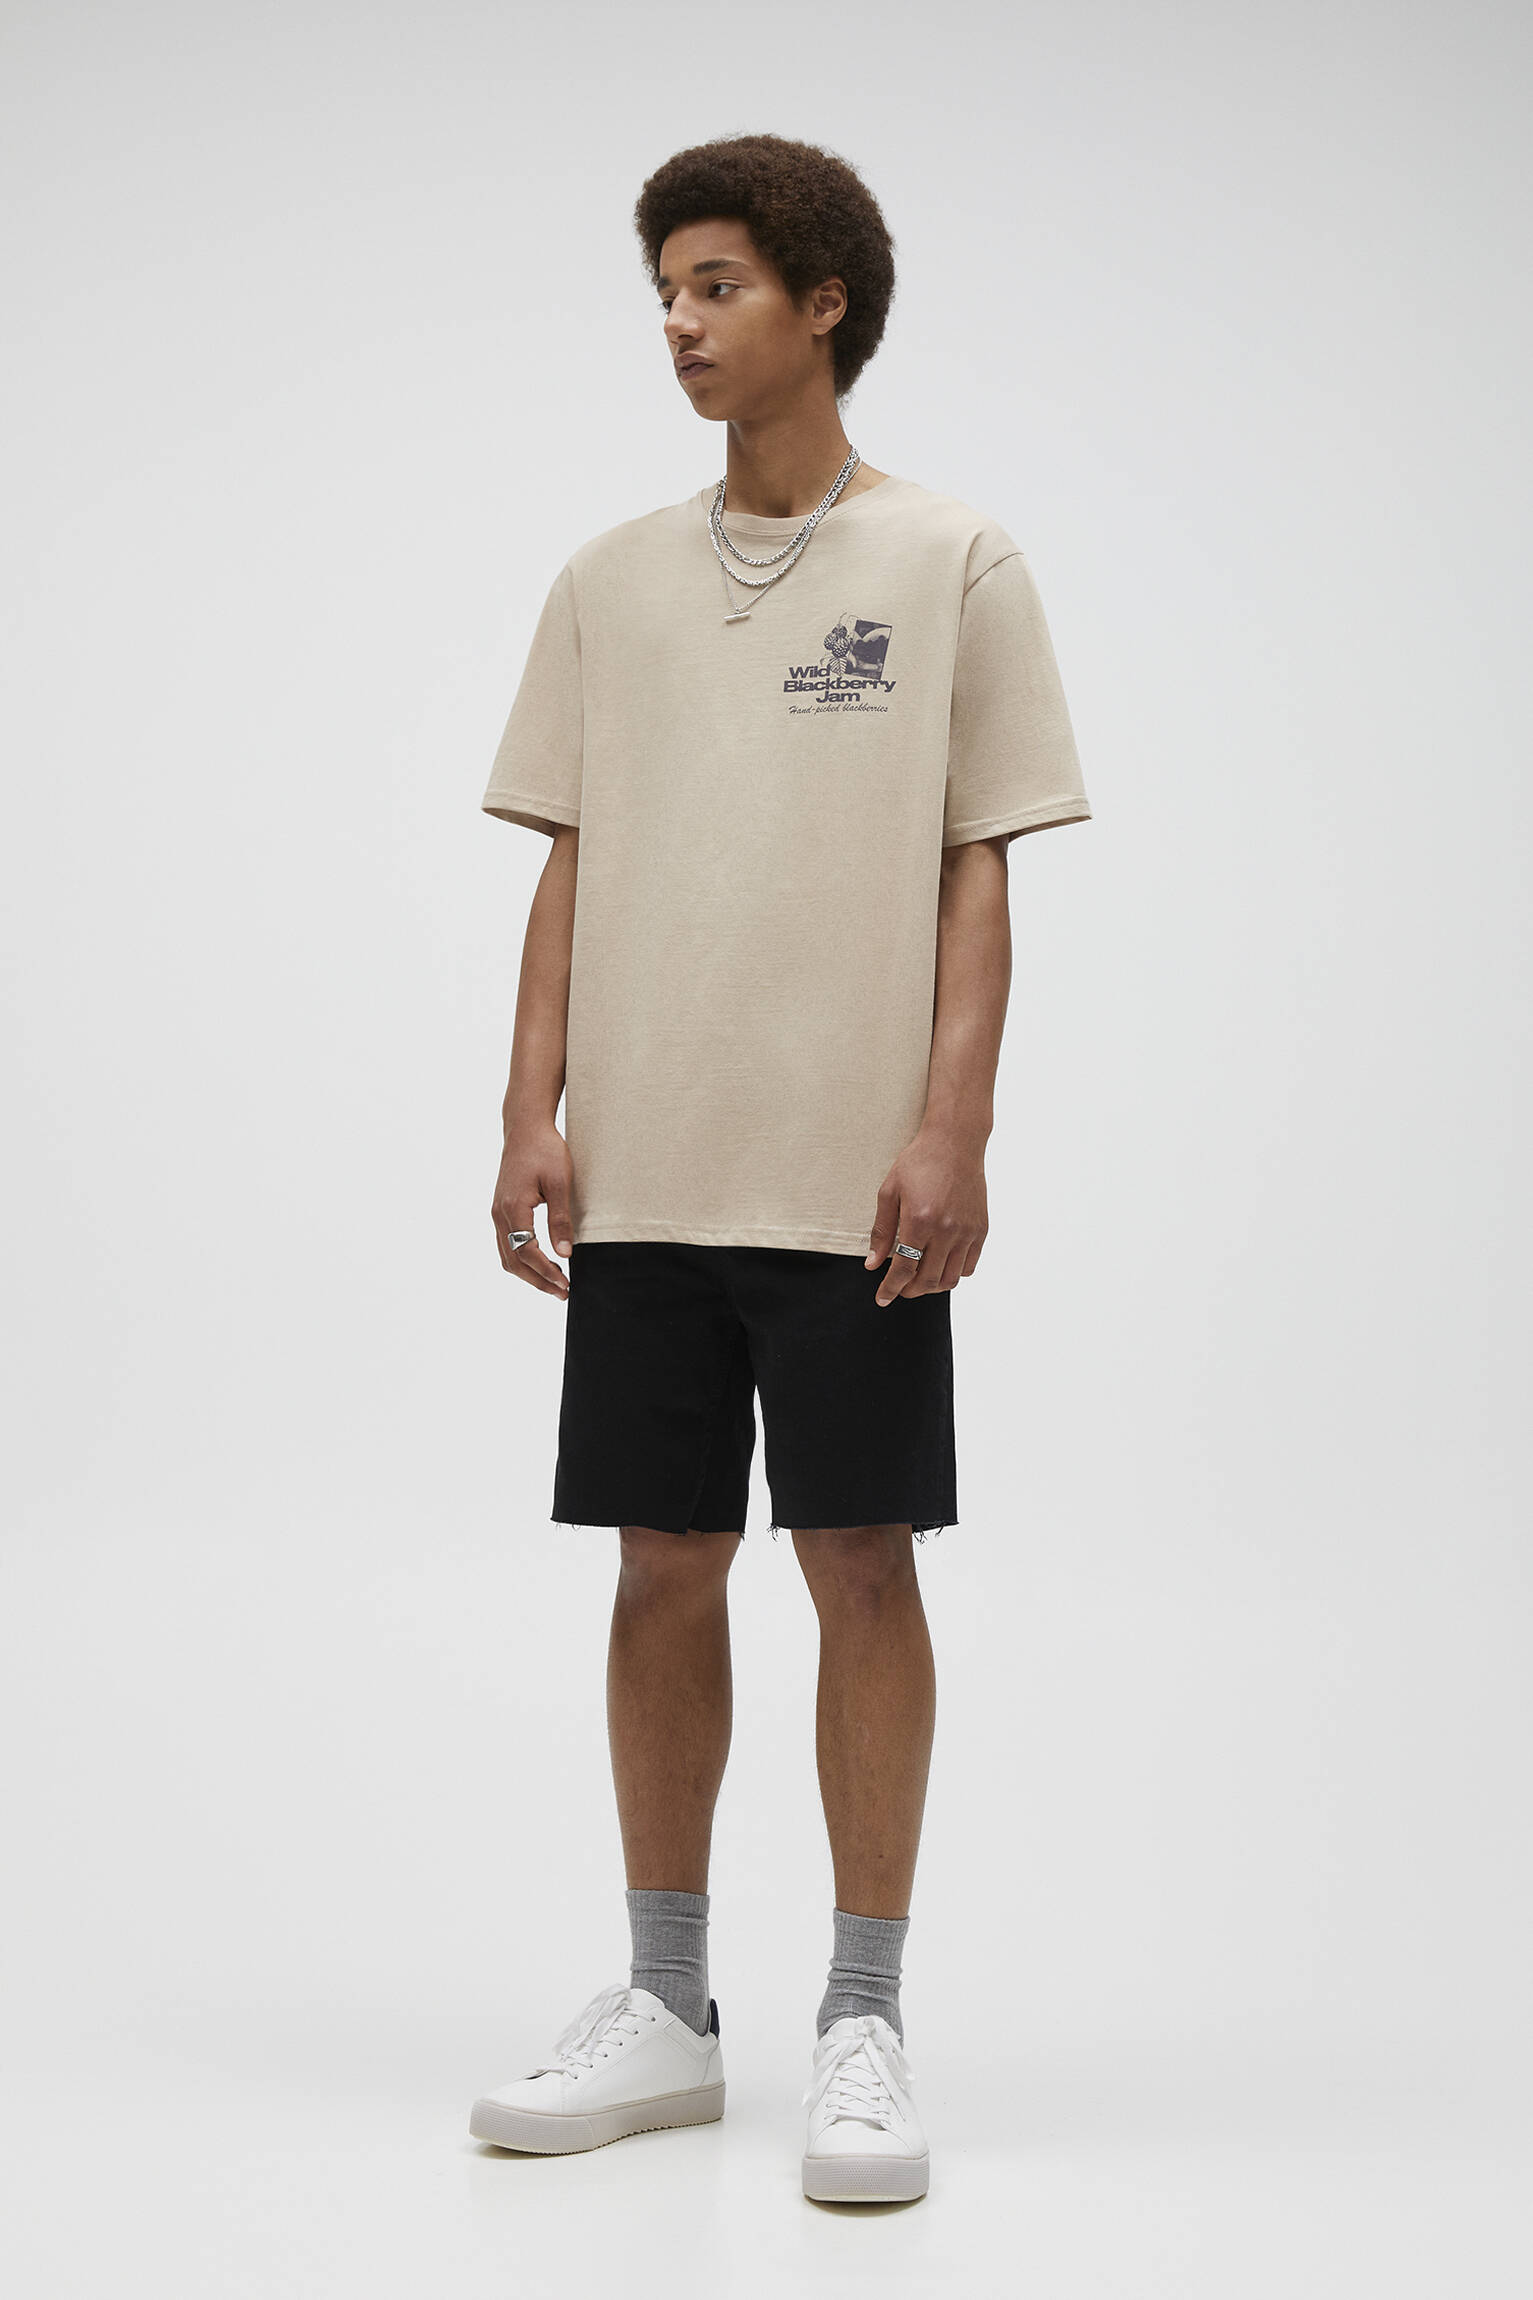 Pull & Bear - STWD logo T-shirt - ecologically grown cotton (at least 50%)